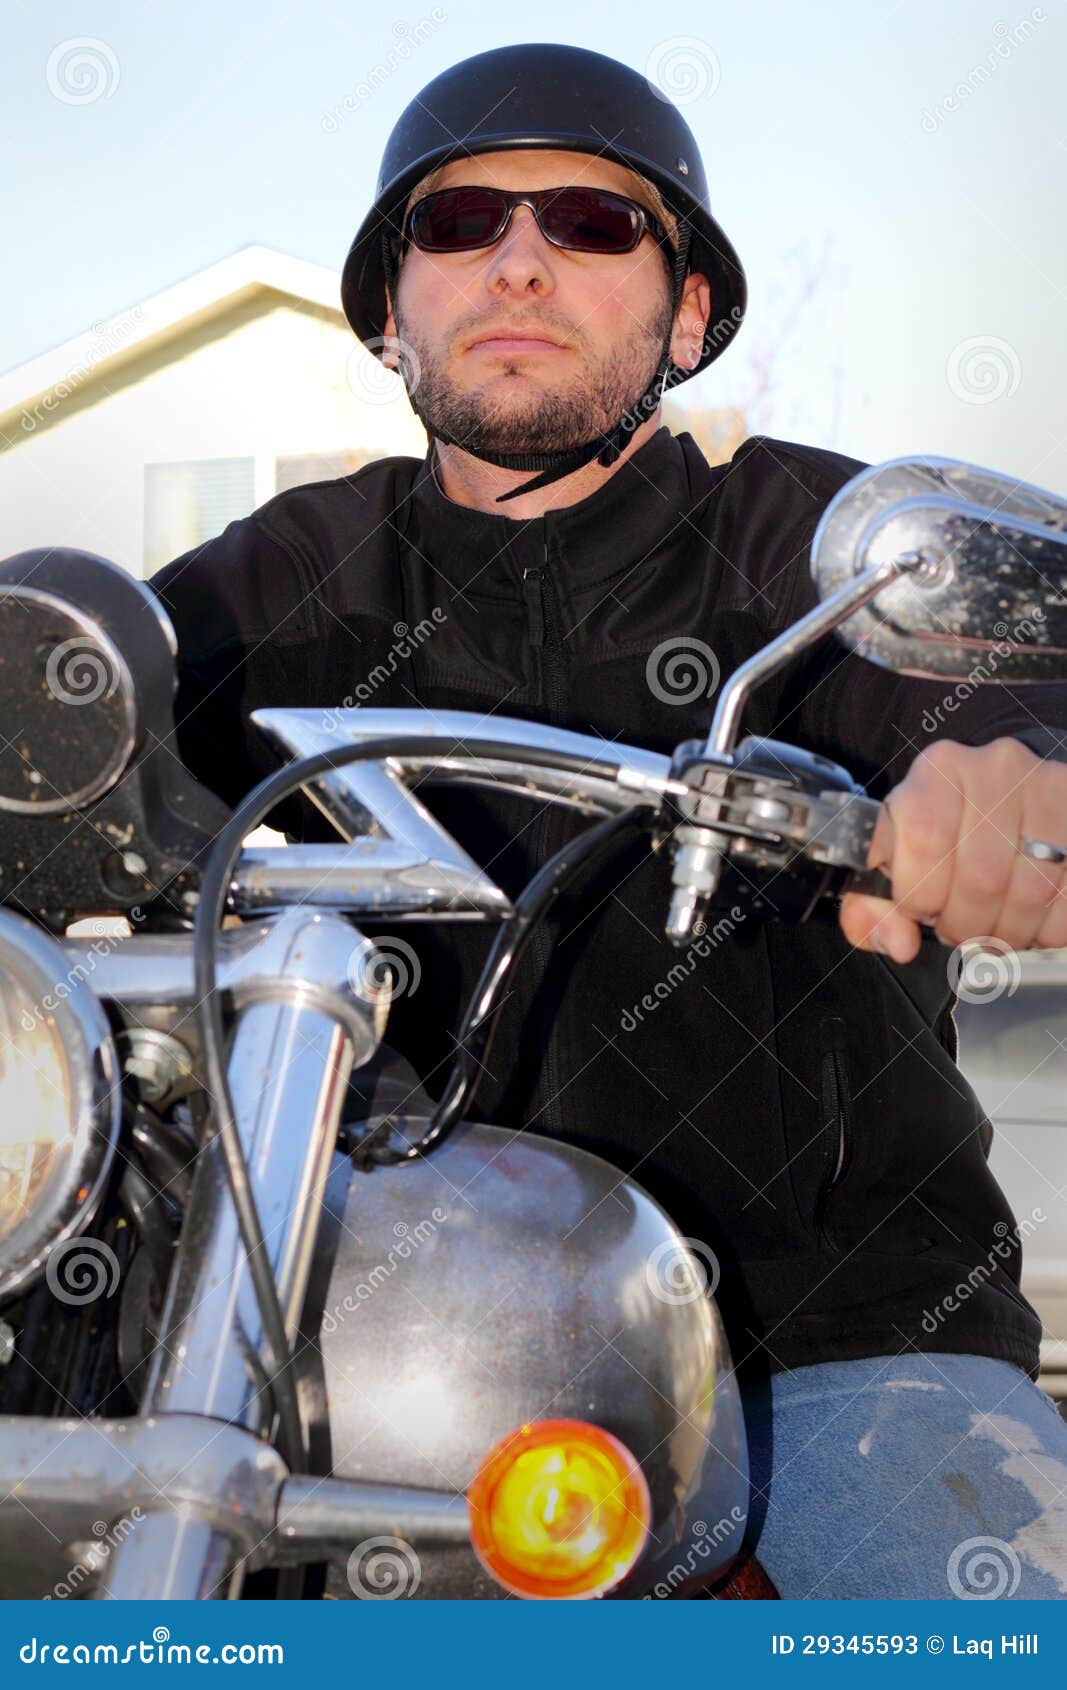 Biker Ready to Ride stock image. Image of adult, german - 29345593